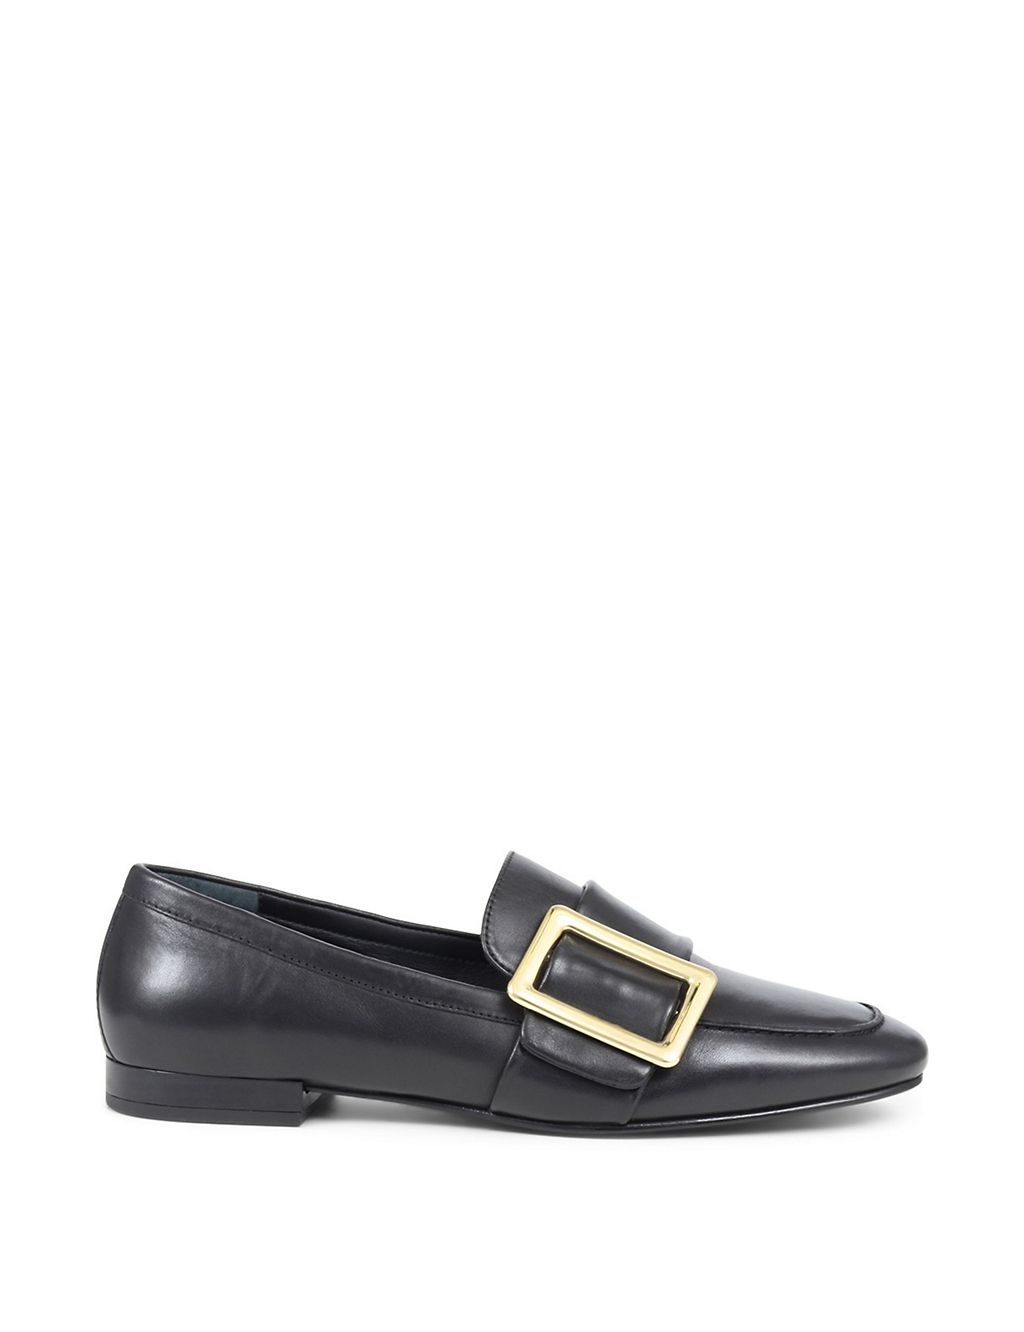 Leather Buckle Flat Loafers 1 of 7